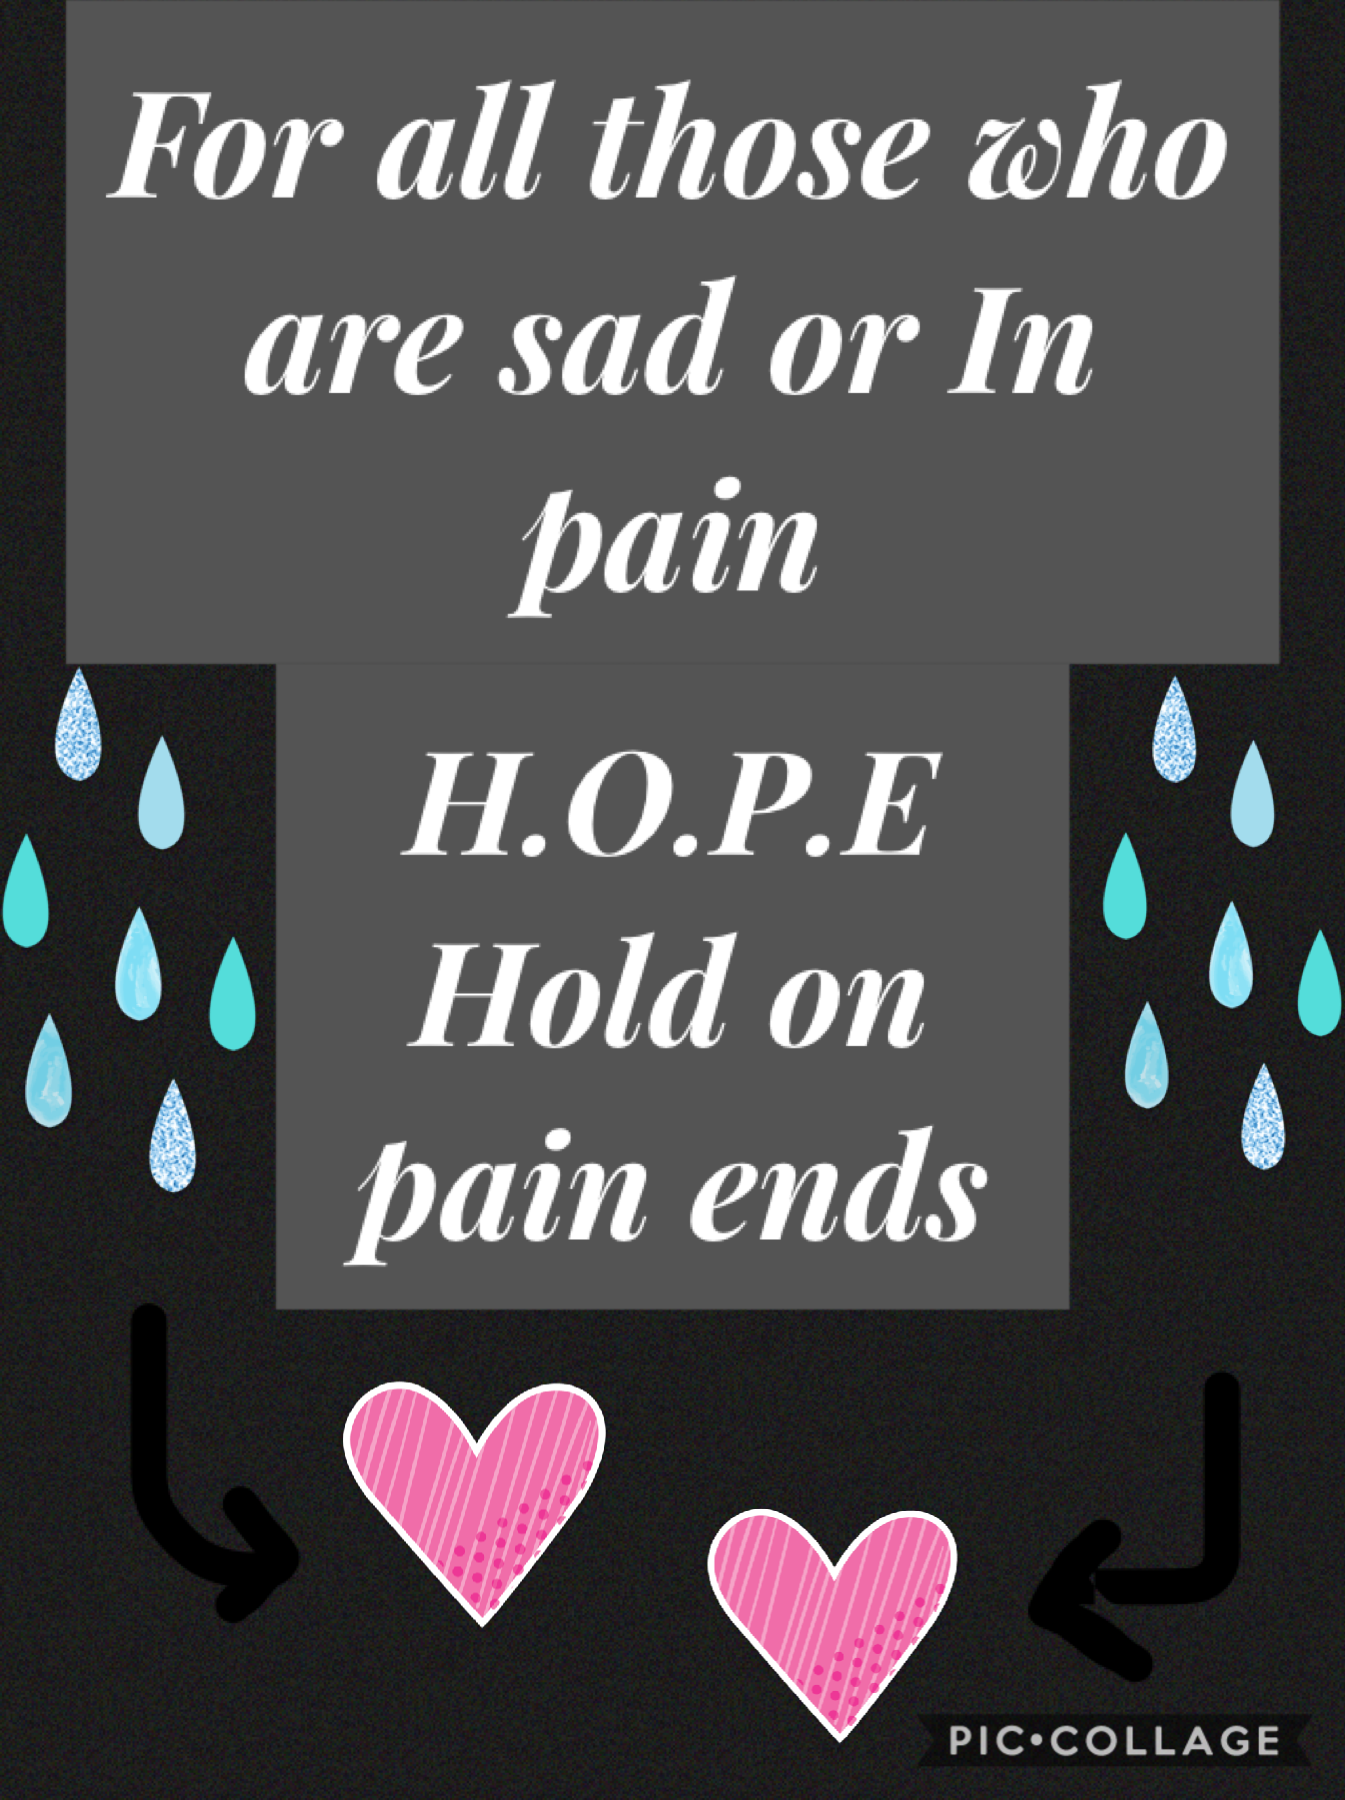 This is for all of those who are in pain and need some inspiration just remember h.o.p.e